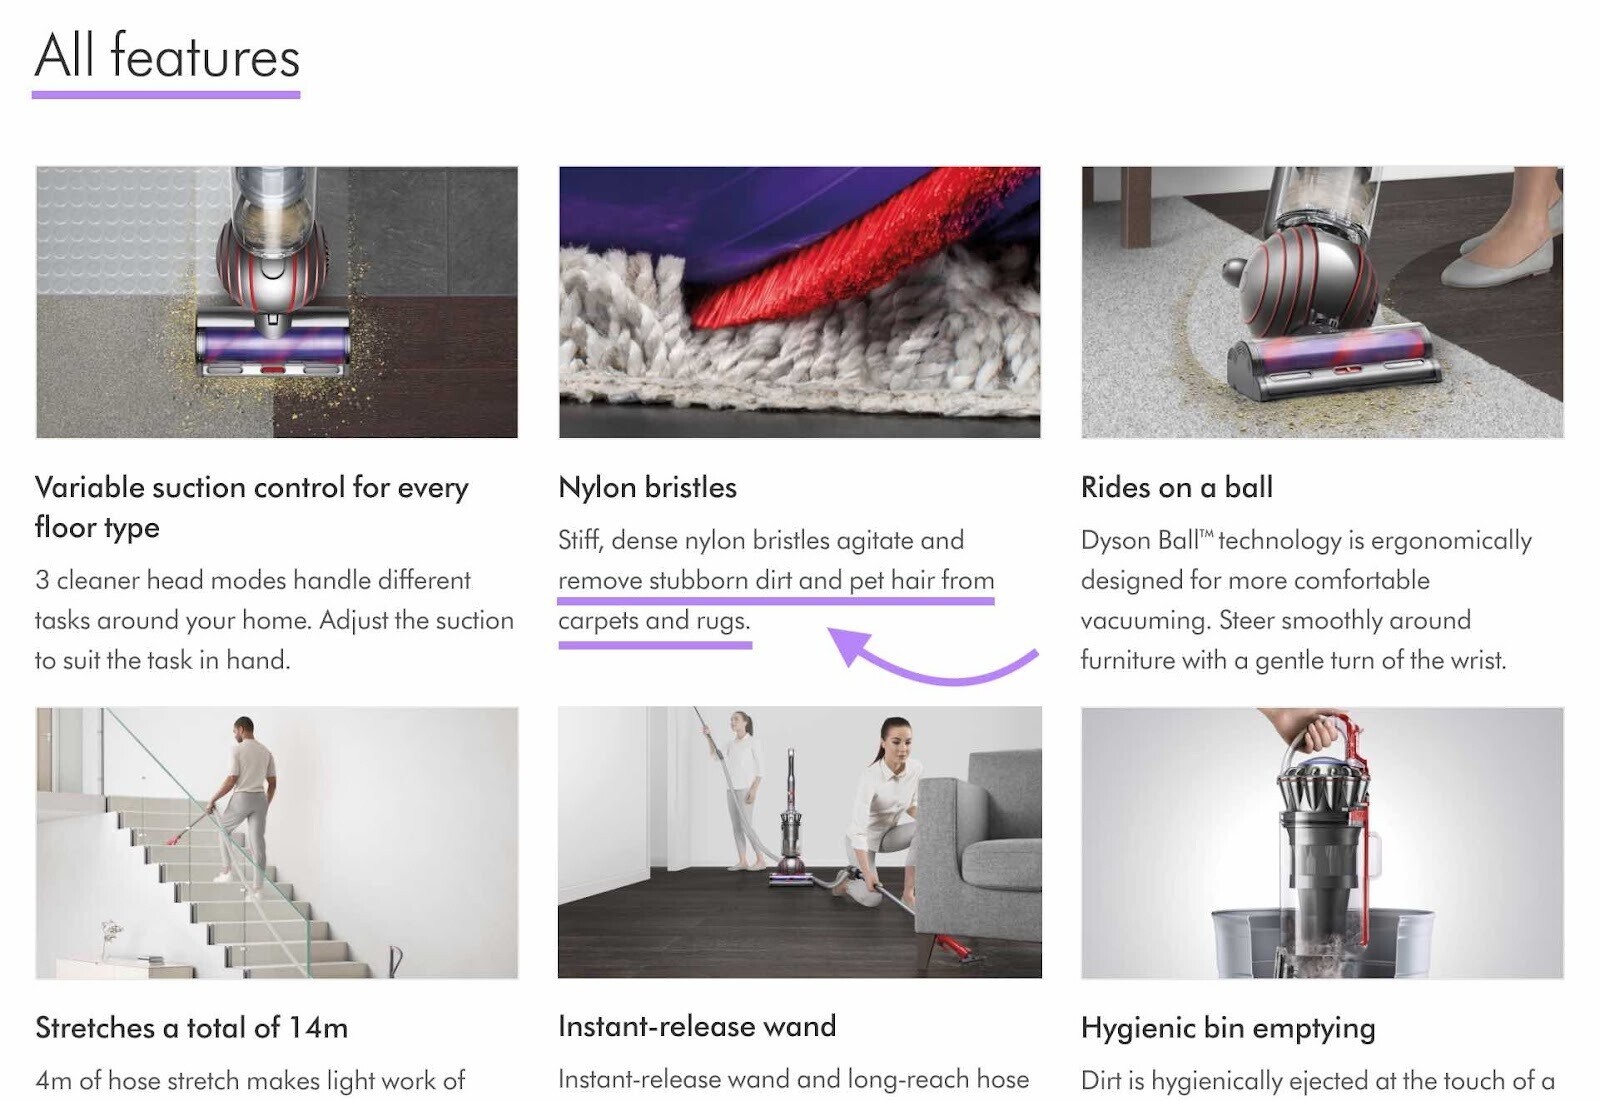 an example of Dyson vacuum cleaner product description: "Stiff, dense nylon bristles agitate and remove stubborn dirt and pet hair from carpets and rugs.”